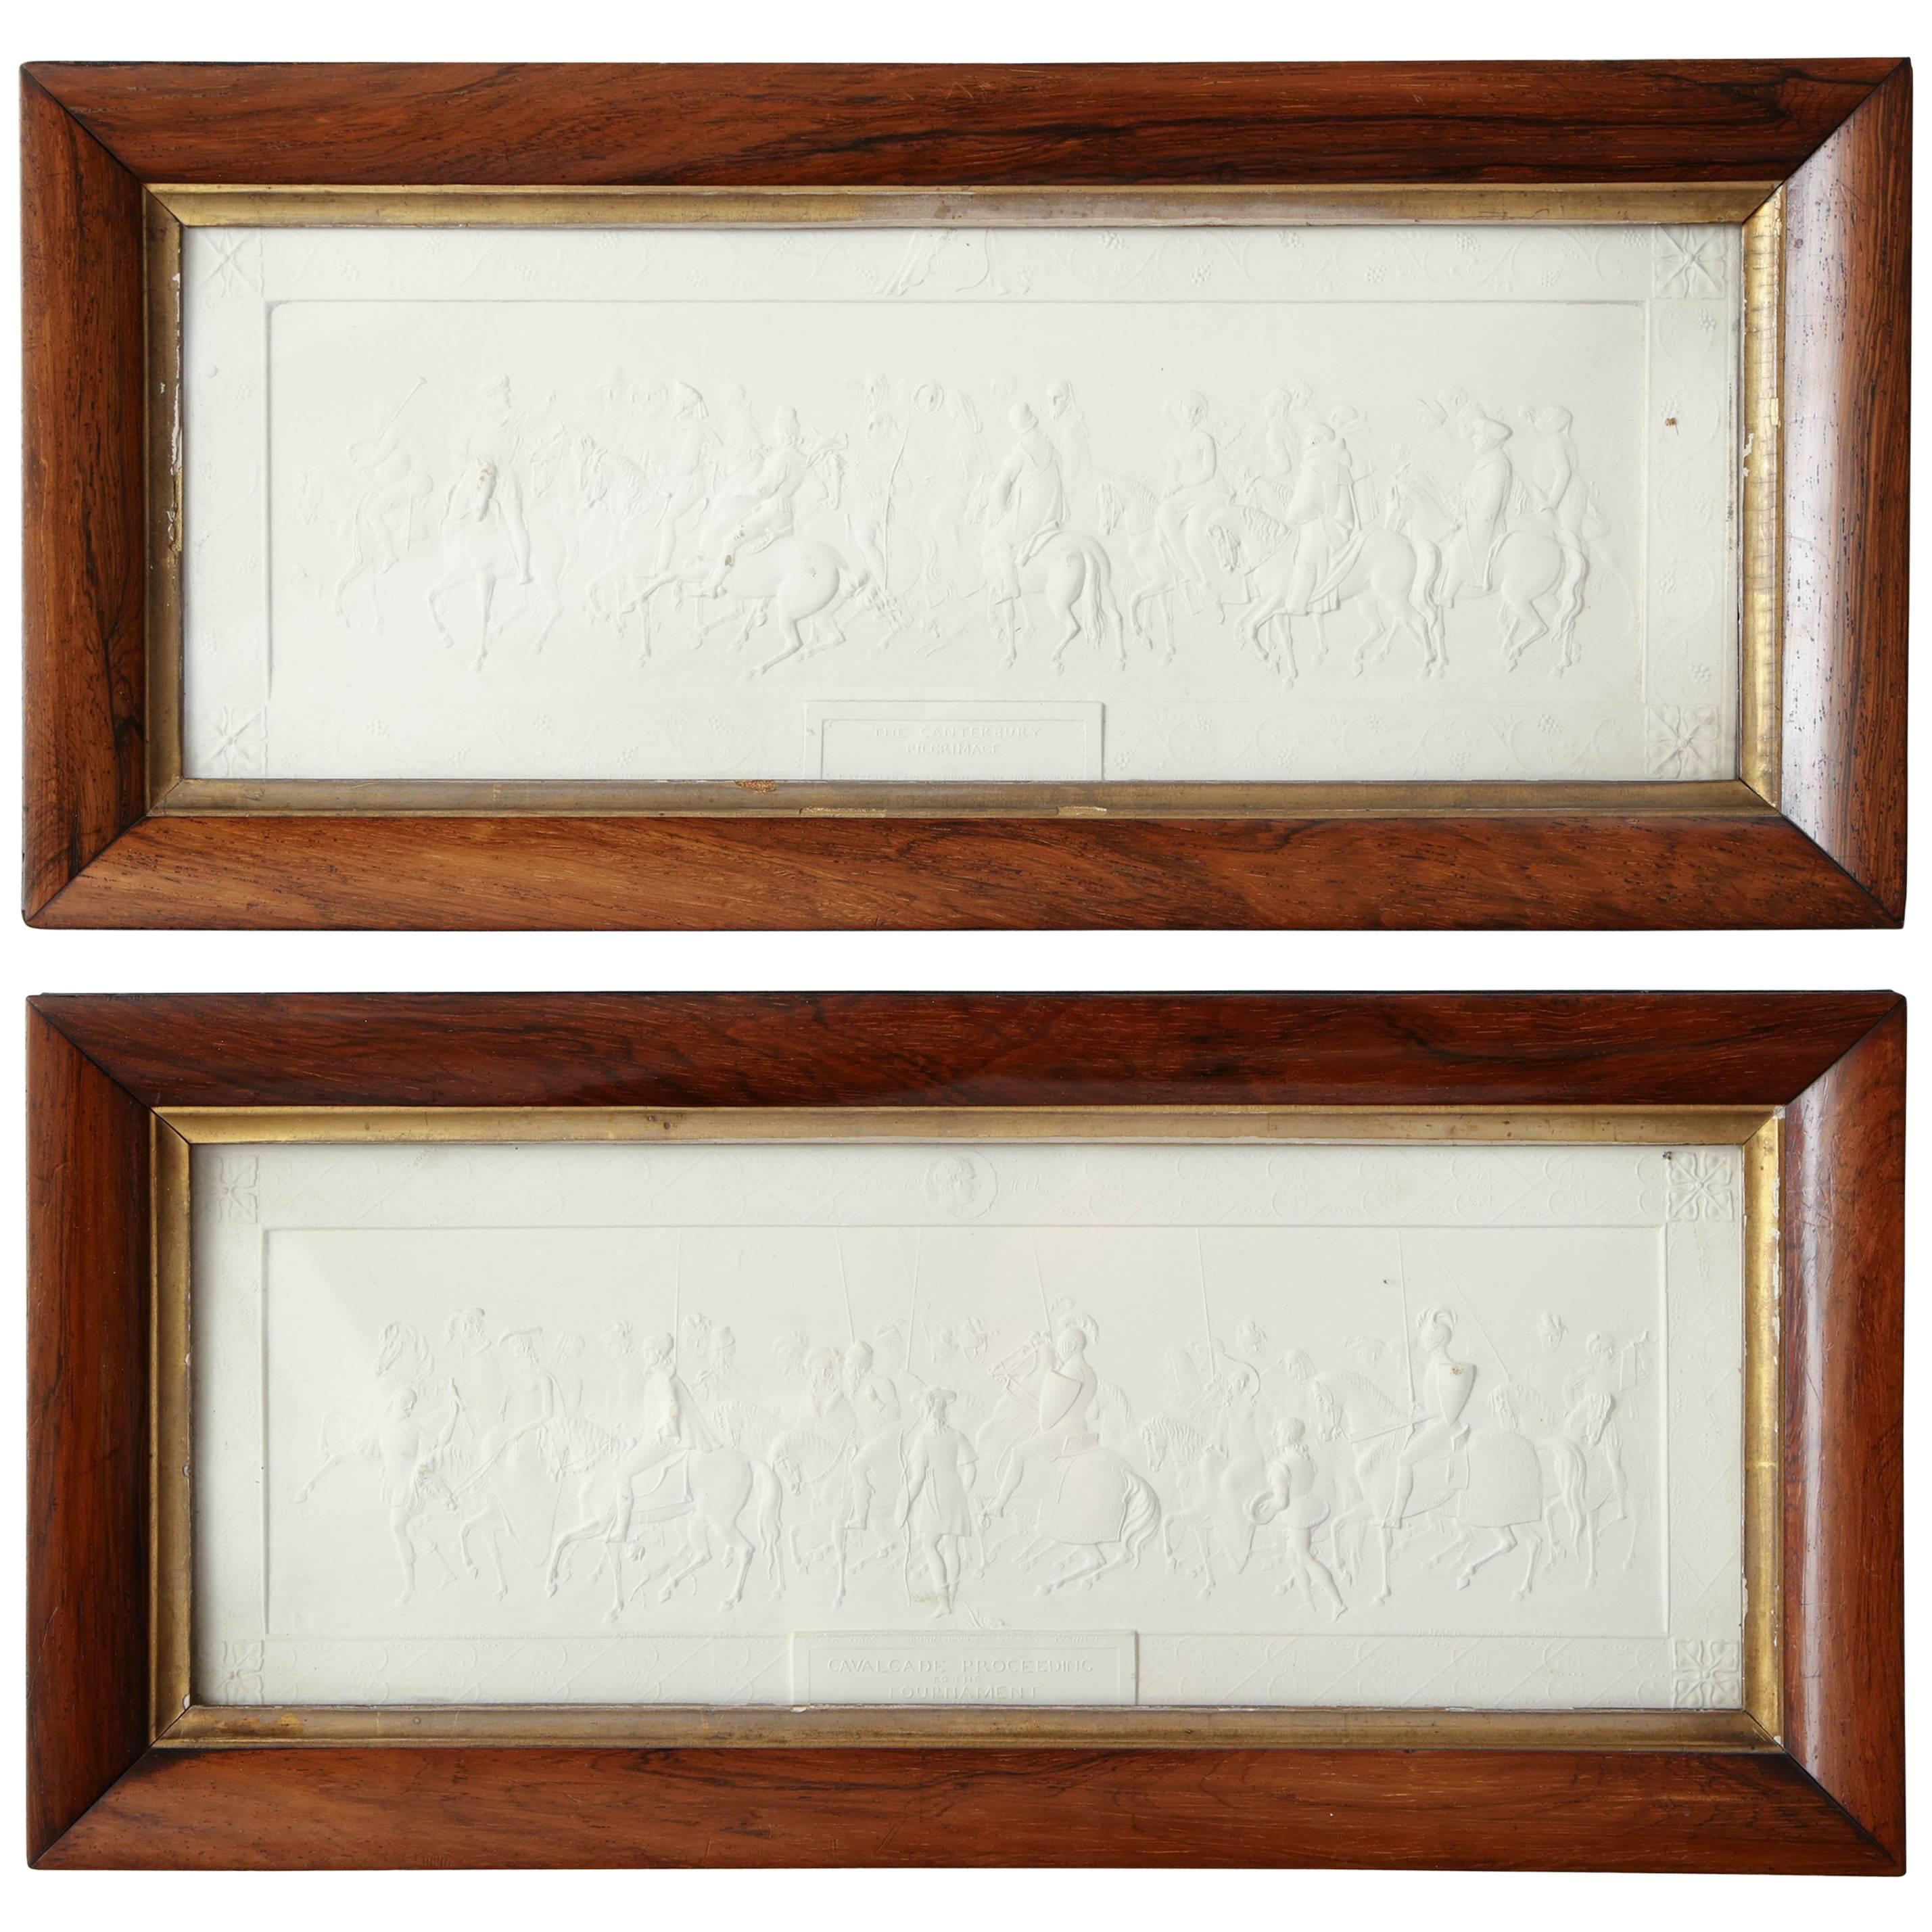 Two 19th Century Plaster Plaques in Hardwood Frames